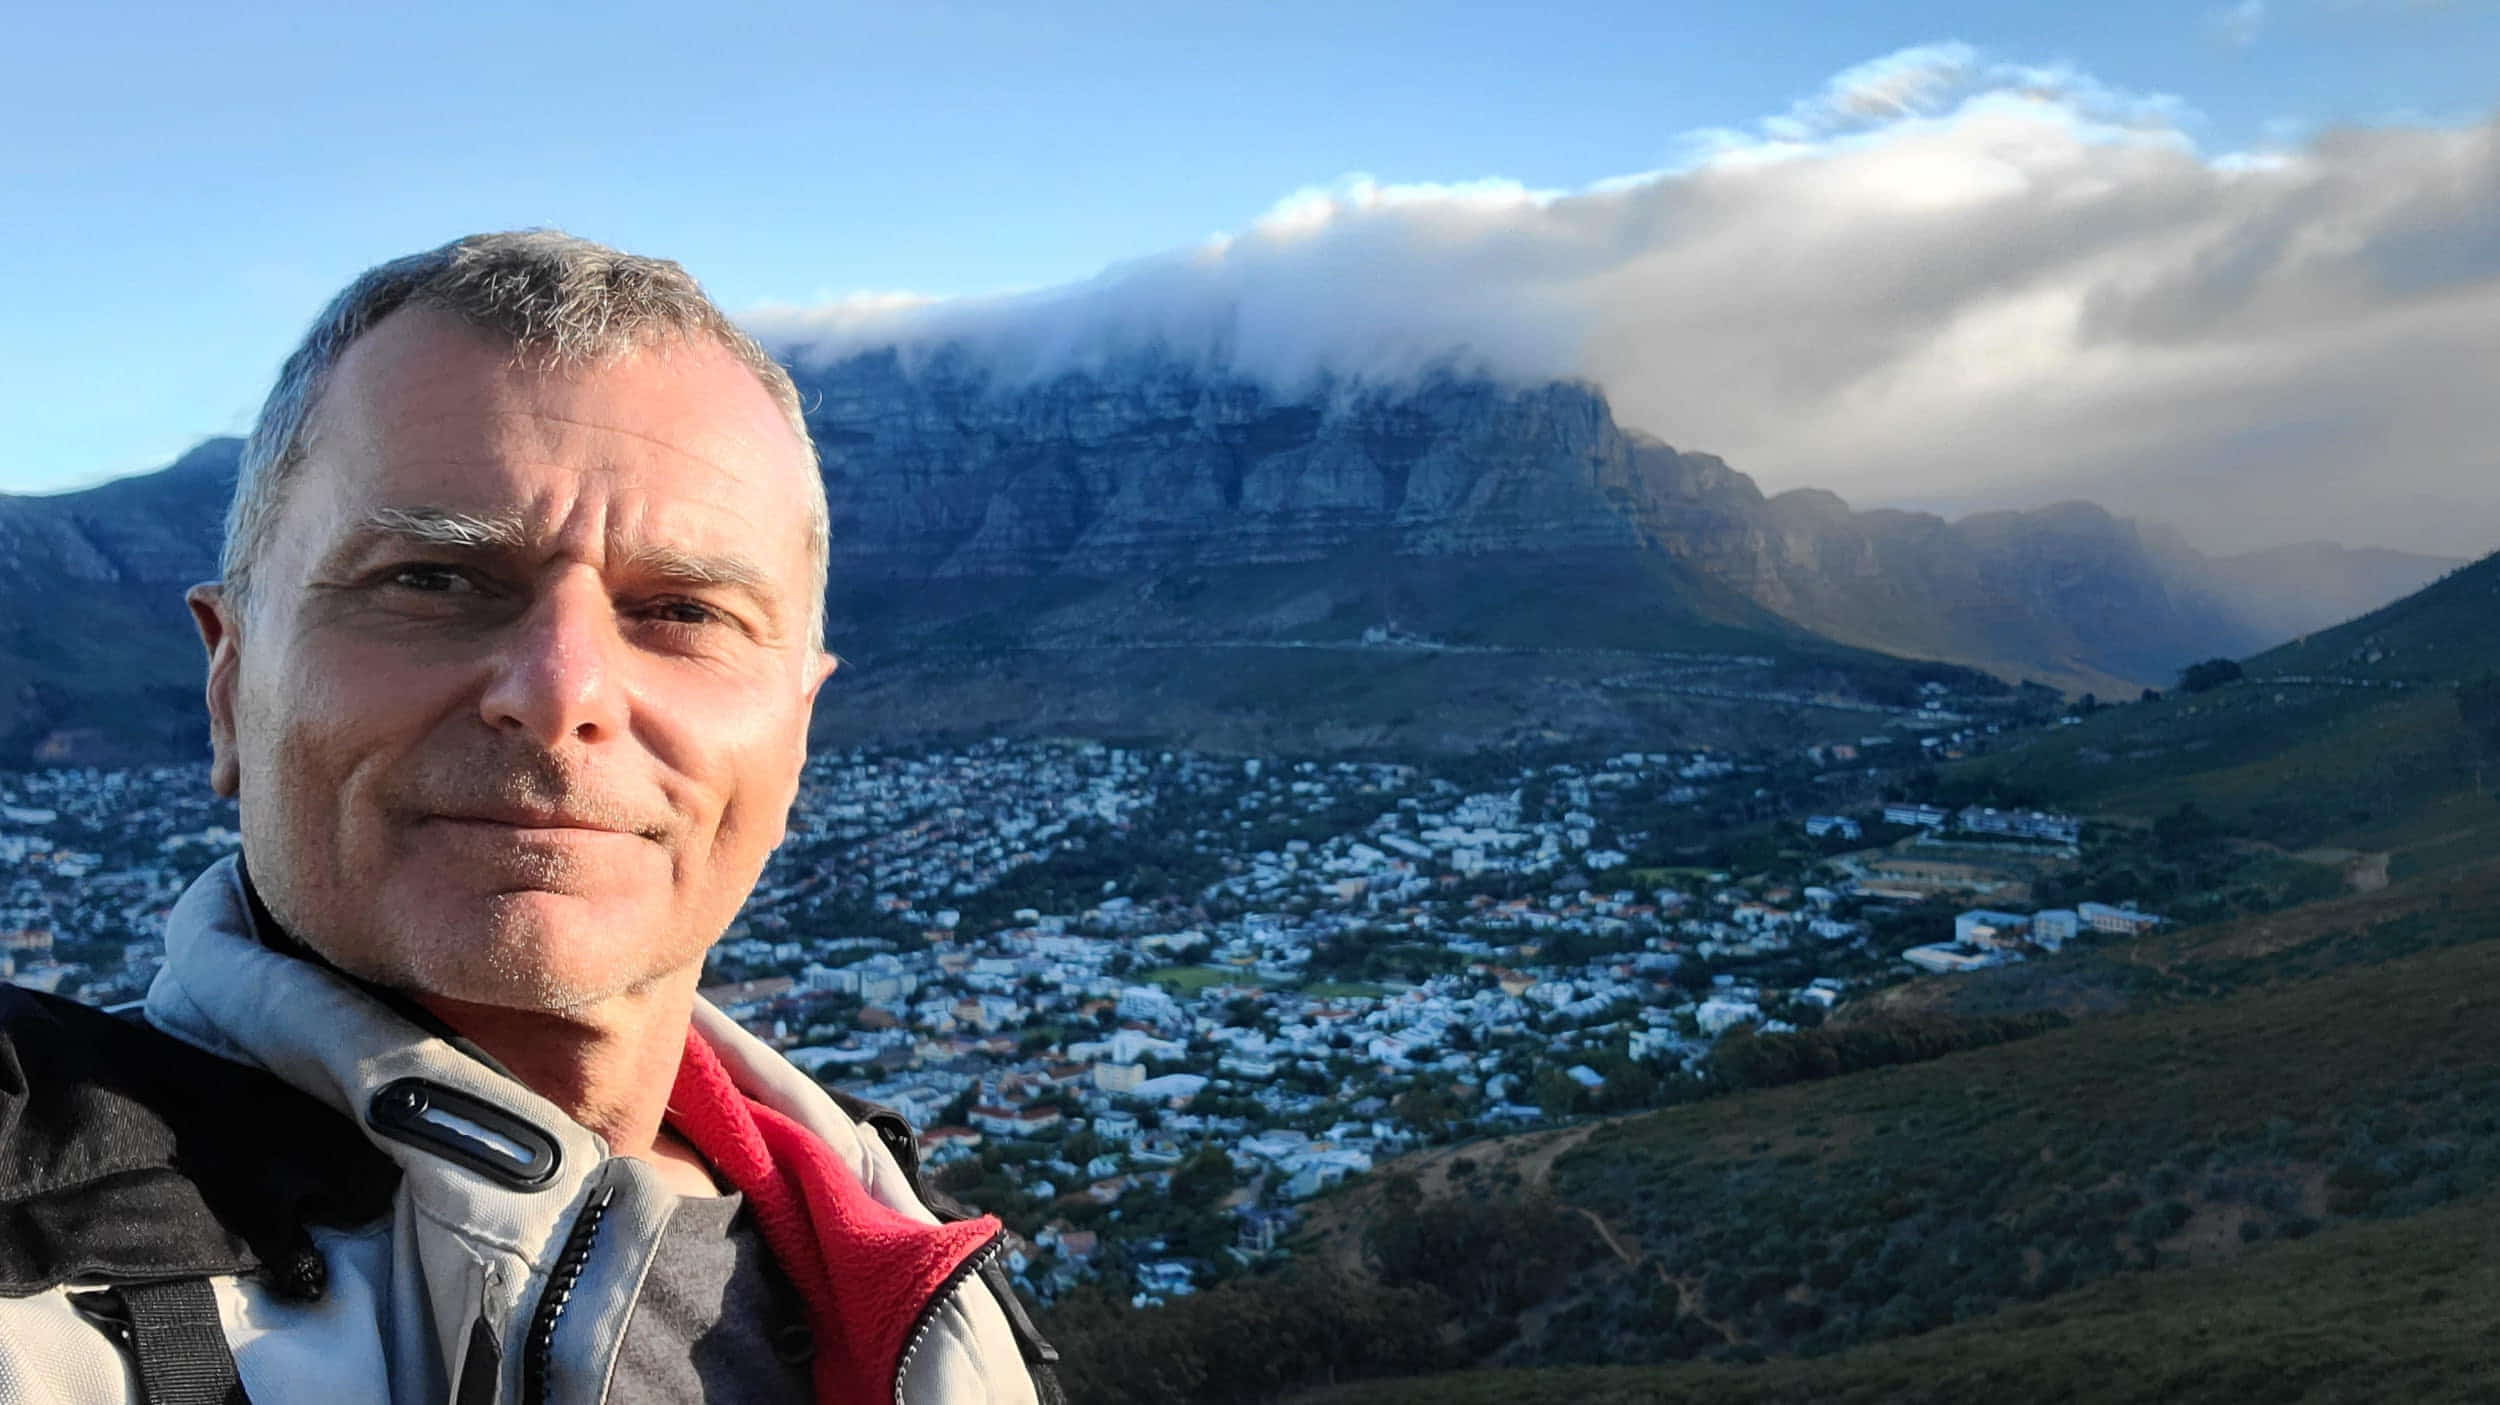 selfie with cloud-covered table top mountain behind